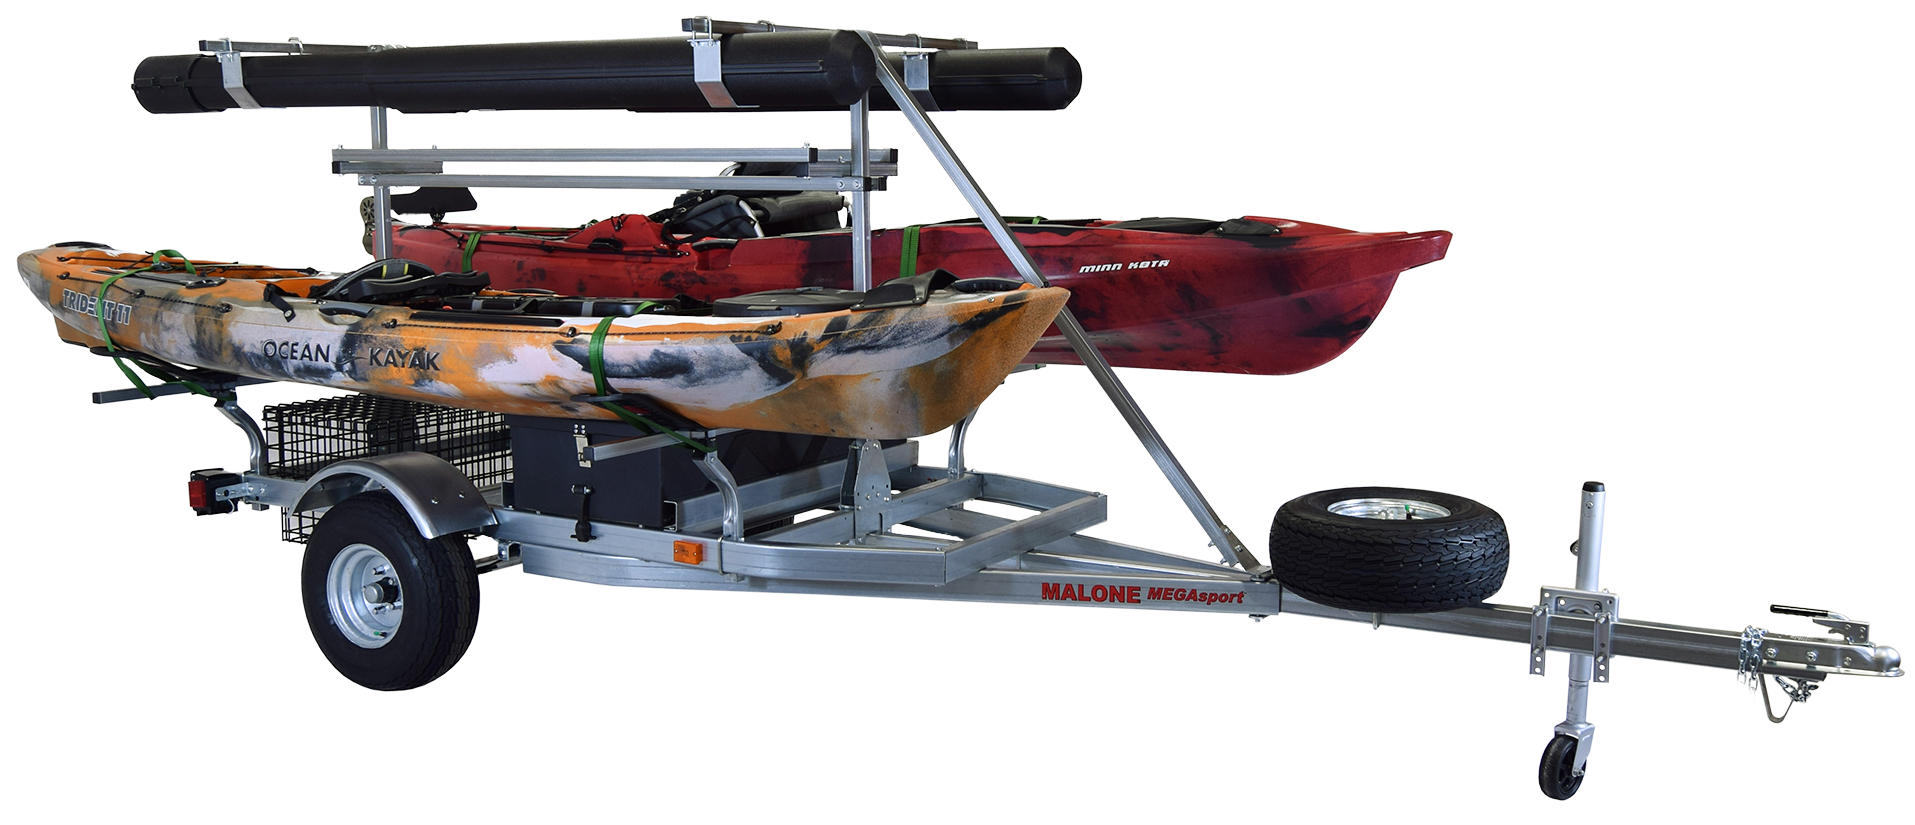 Perfect Kayak Trailer: Accessorize to Fit Your Needs - Florida